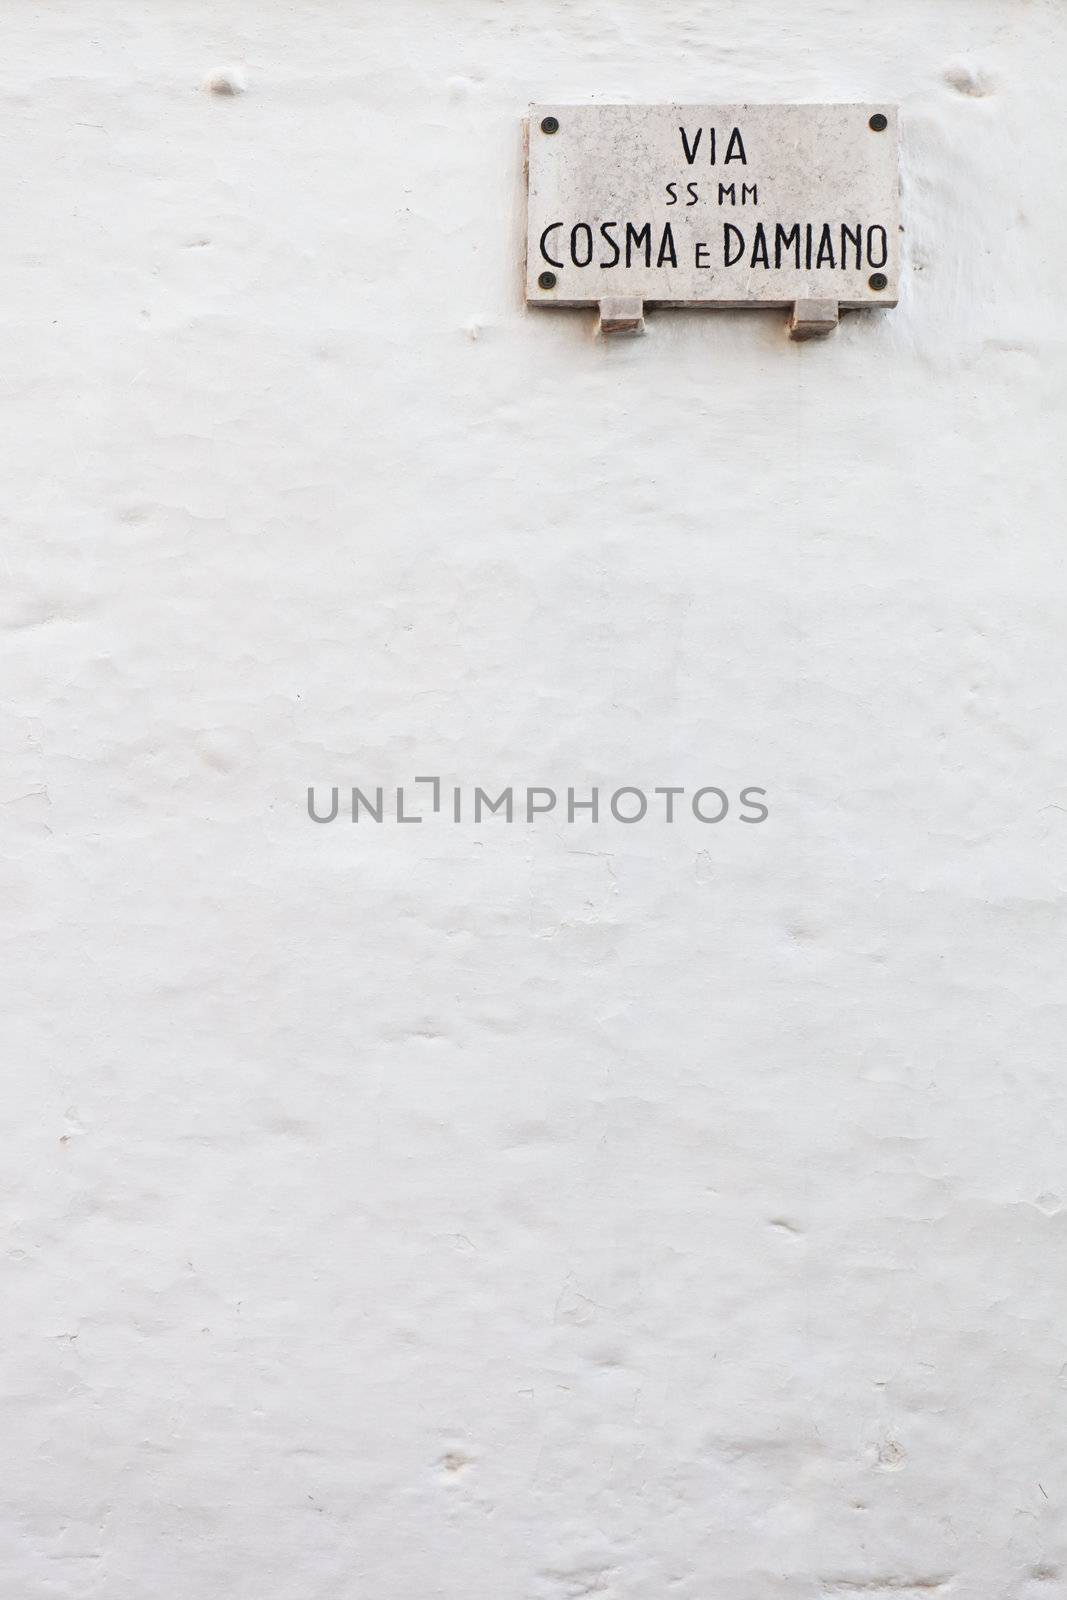 Italian street name plate on a white painted wall